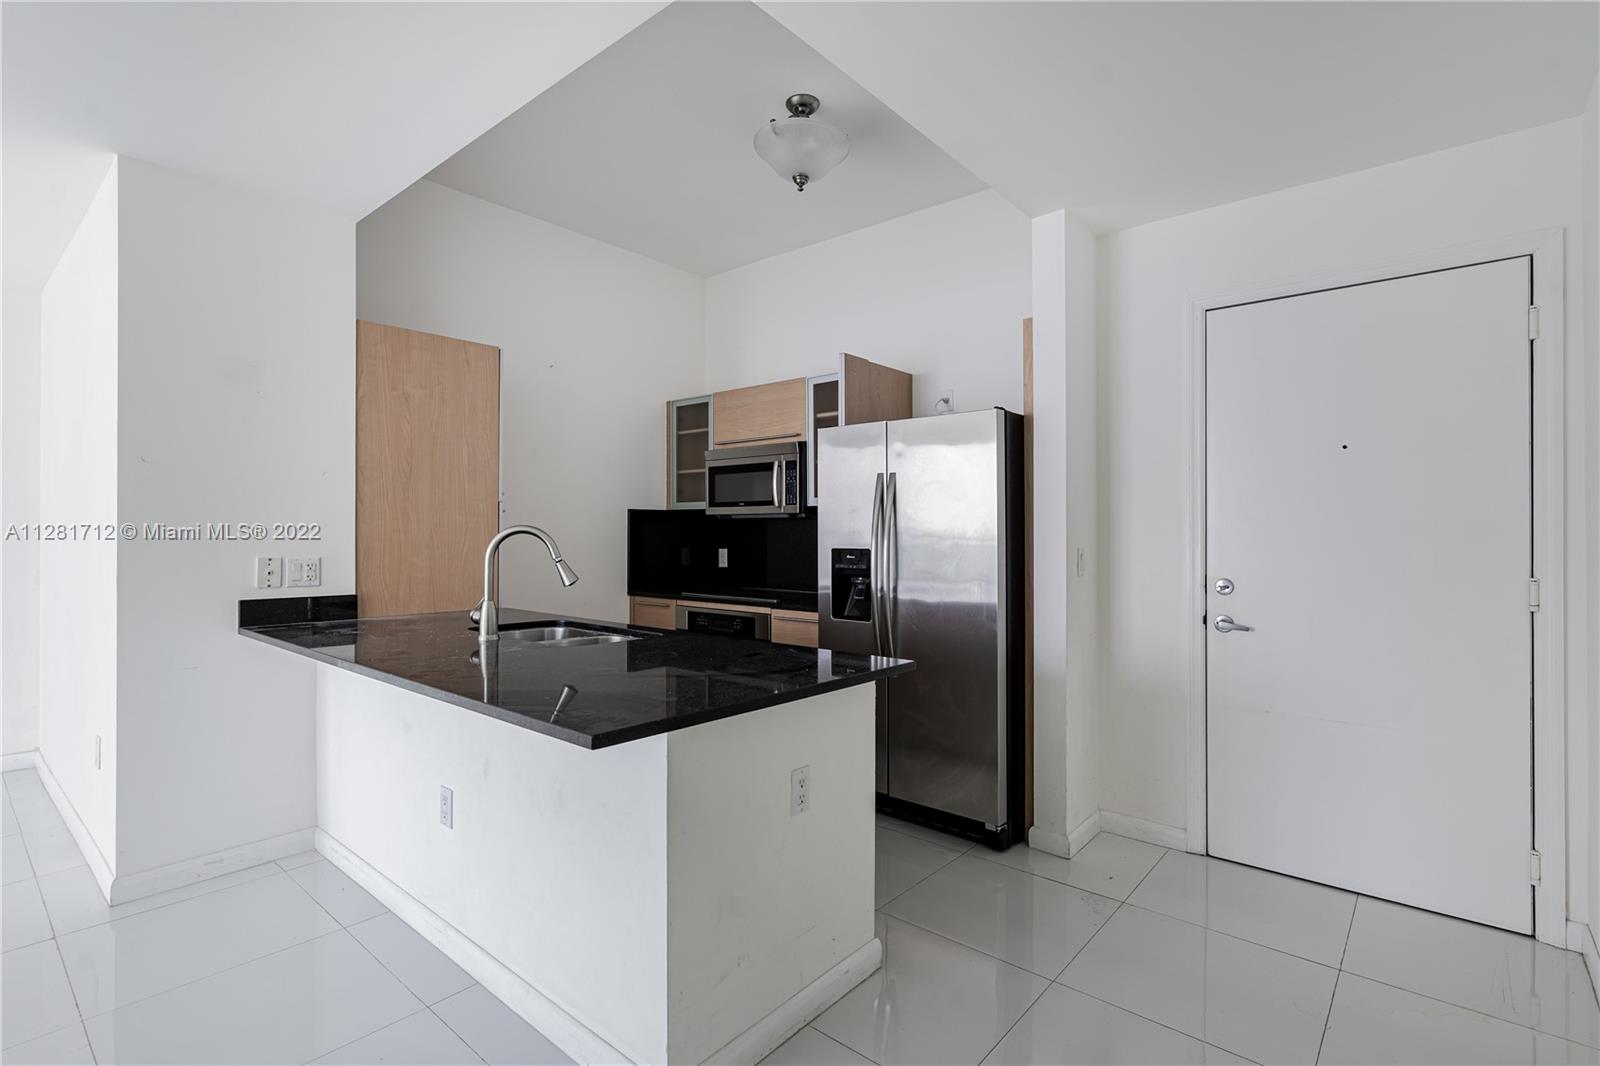 BEAUTIFUL 2BEDS/2BATHS WITH WATER VIEW IN THE HEART OF BRICKELL, HIGHT CEILING, BEST LOCATION, CLOSE TO MARY BRICKELL VILLAGE, DOWN TOWN MIAMI AND MORE, WHITE PORCELAIN FLOOR, EASY TO SHOW TEXT LISTING AGENT